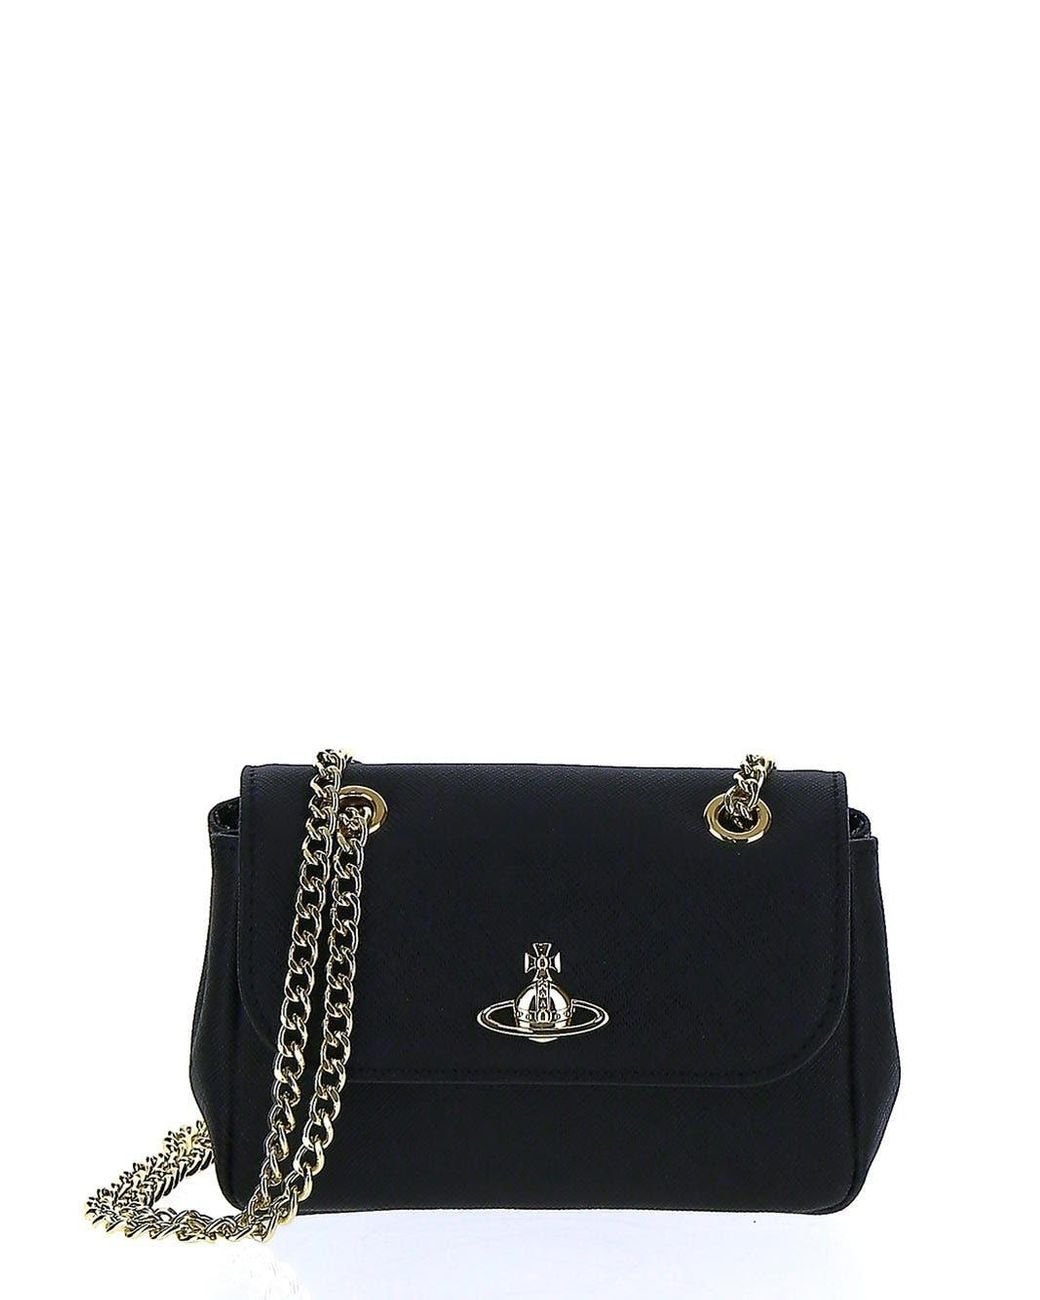 Vivienne Westwood Leather Saffiano Small Purse With Chain in Black | Lyst